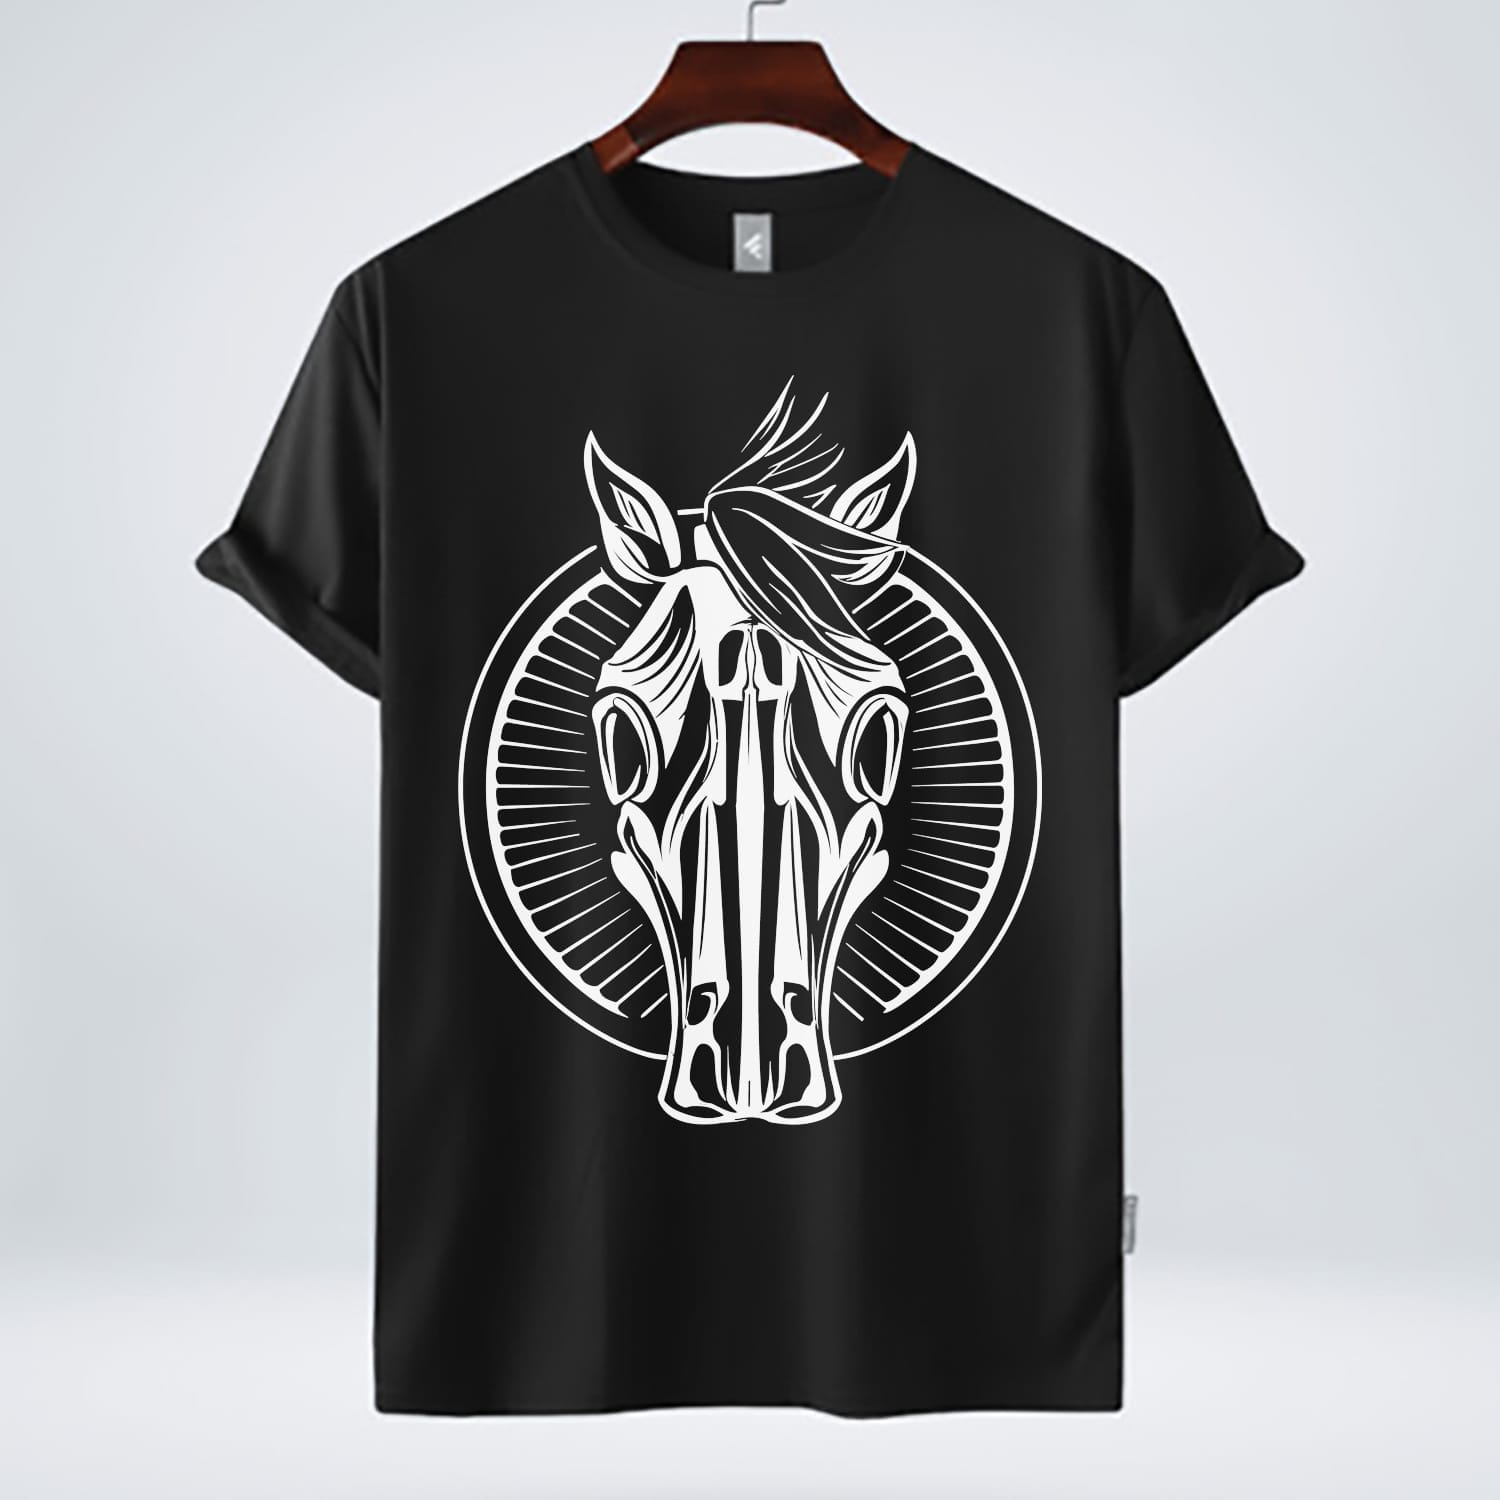 Embrace the mysterious beauty of our "Horse Skeleton" t-shirt design